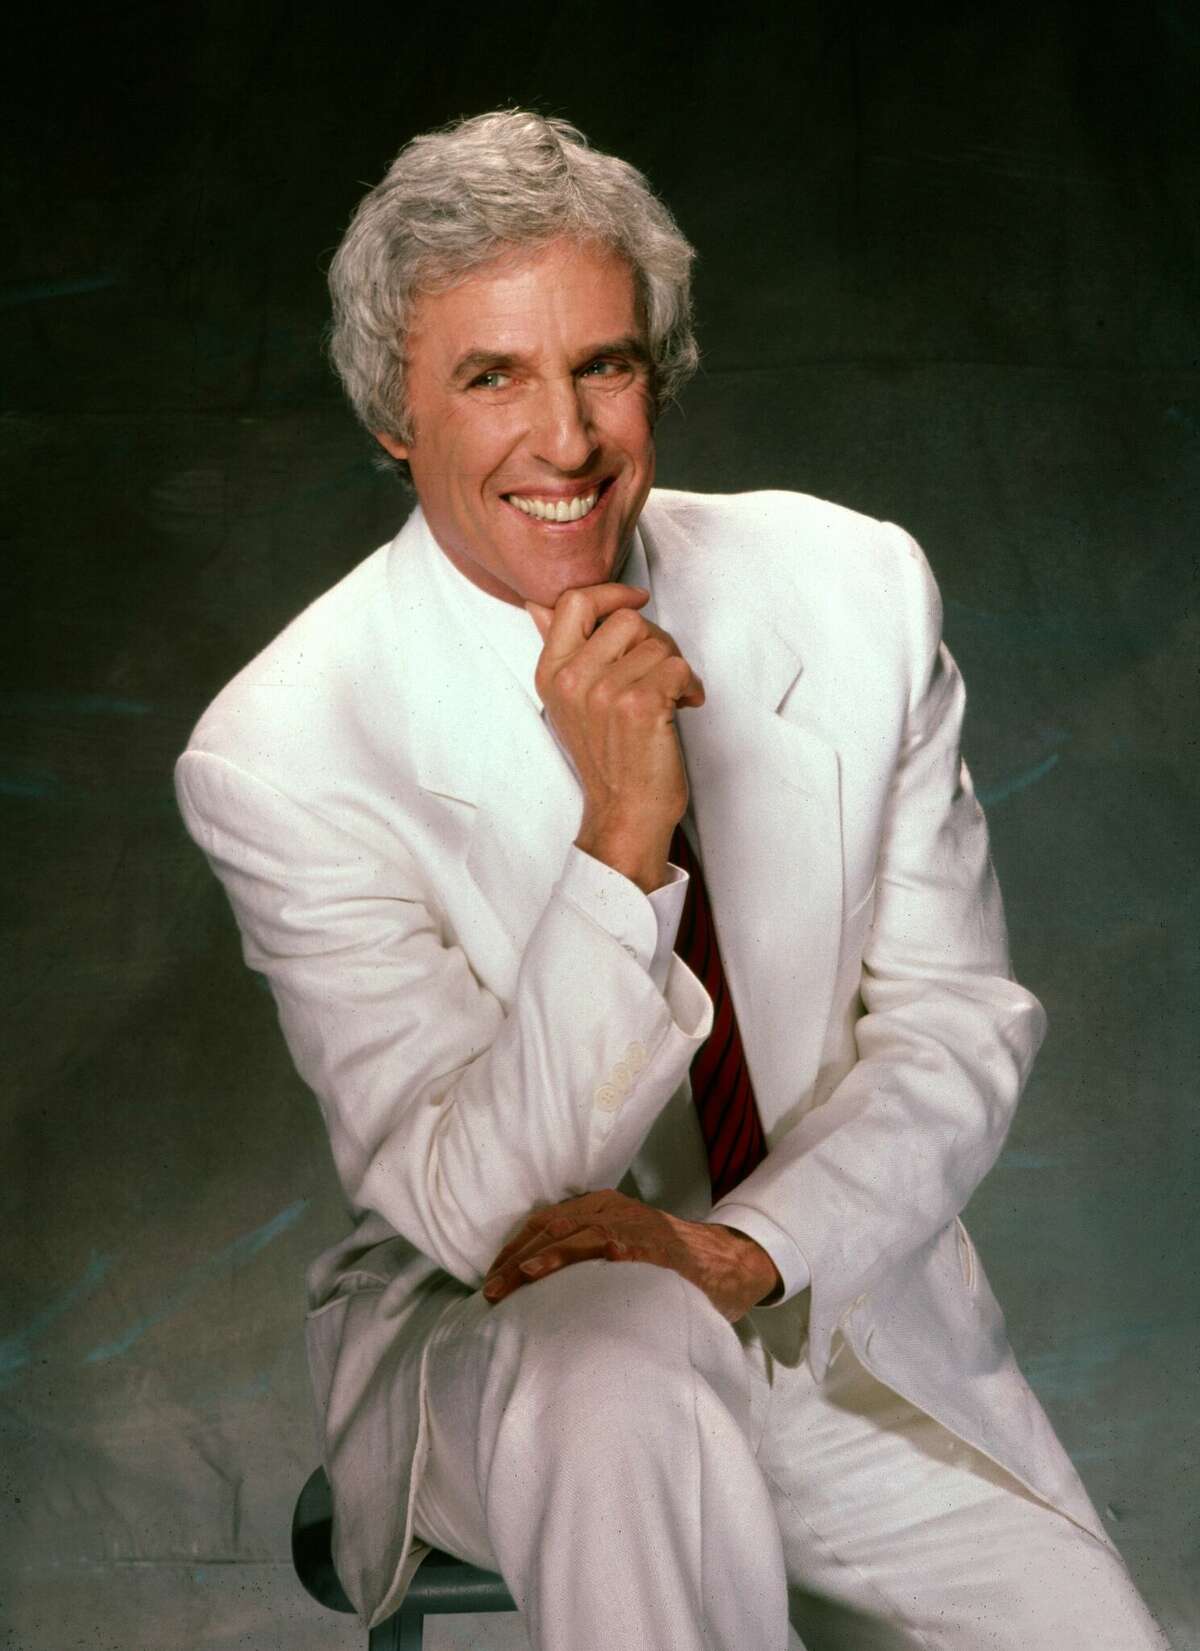 LOS ANGELES - 1987: Composer and producer Burt Bacharach poses for a portrait in 1987 in Los Angeles, California. (Photo by Harry Langdon/Getty Images)